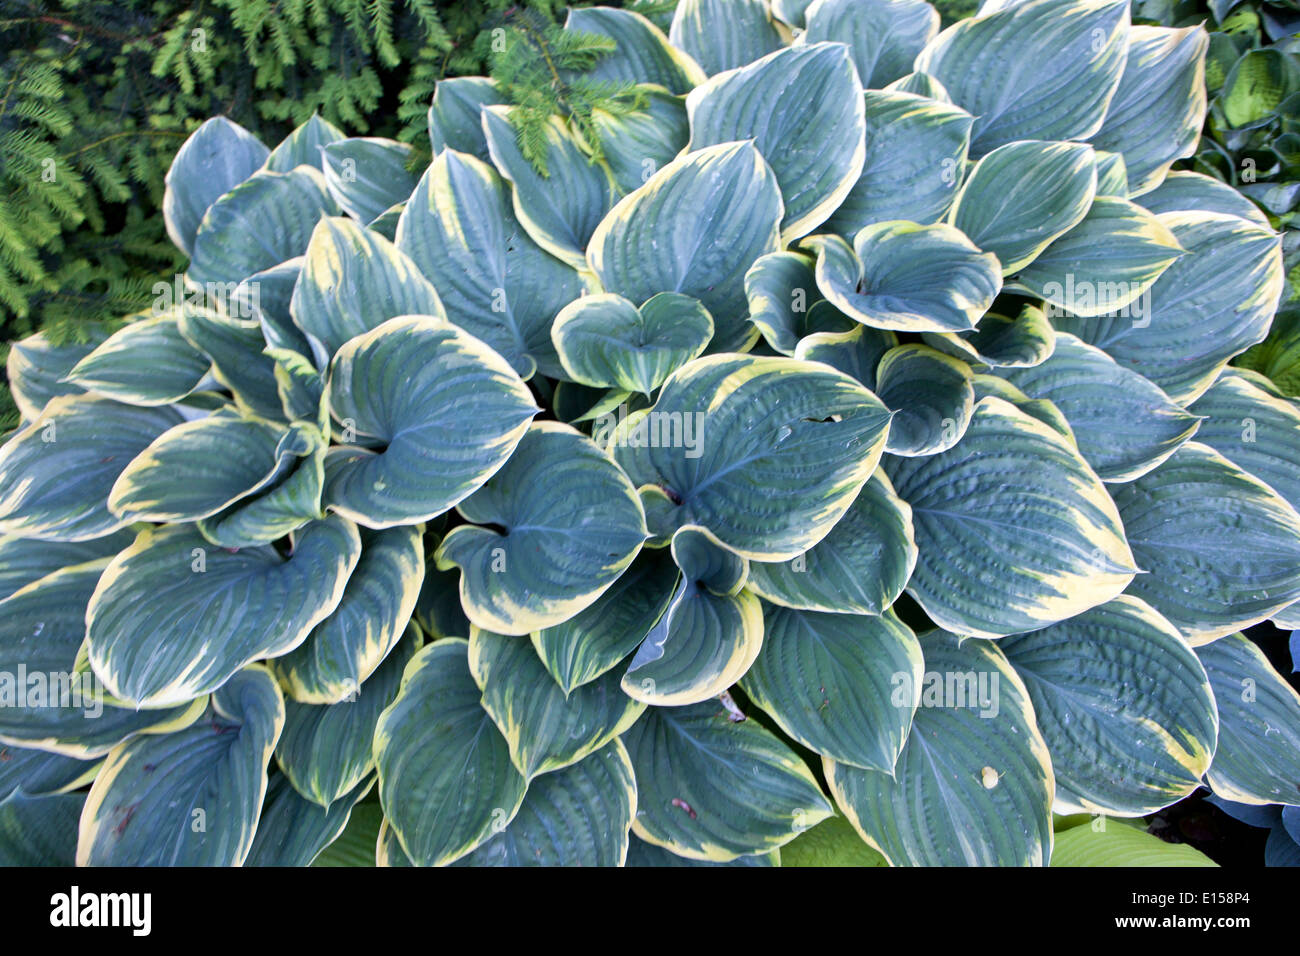 Hosta plant with variegated leaves in perennial garden Stock Photo